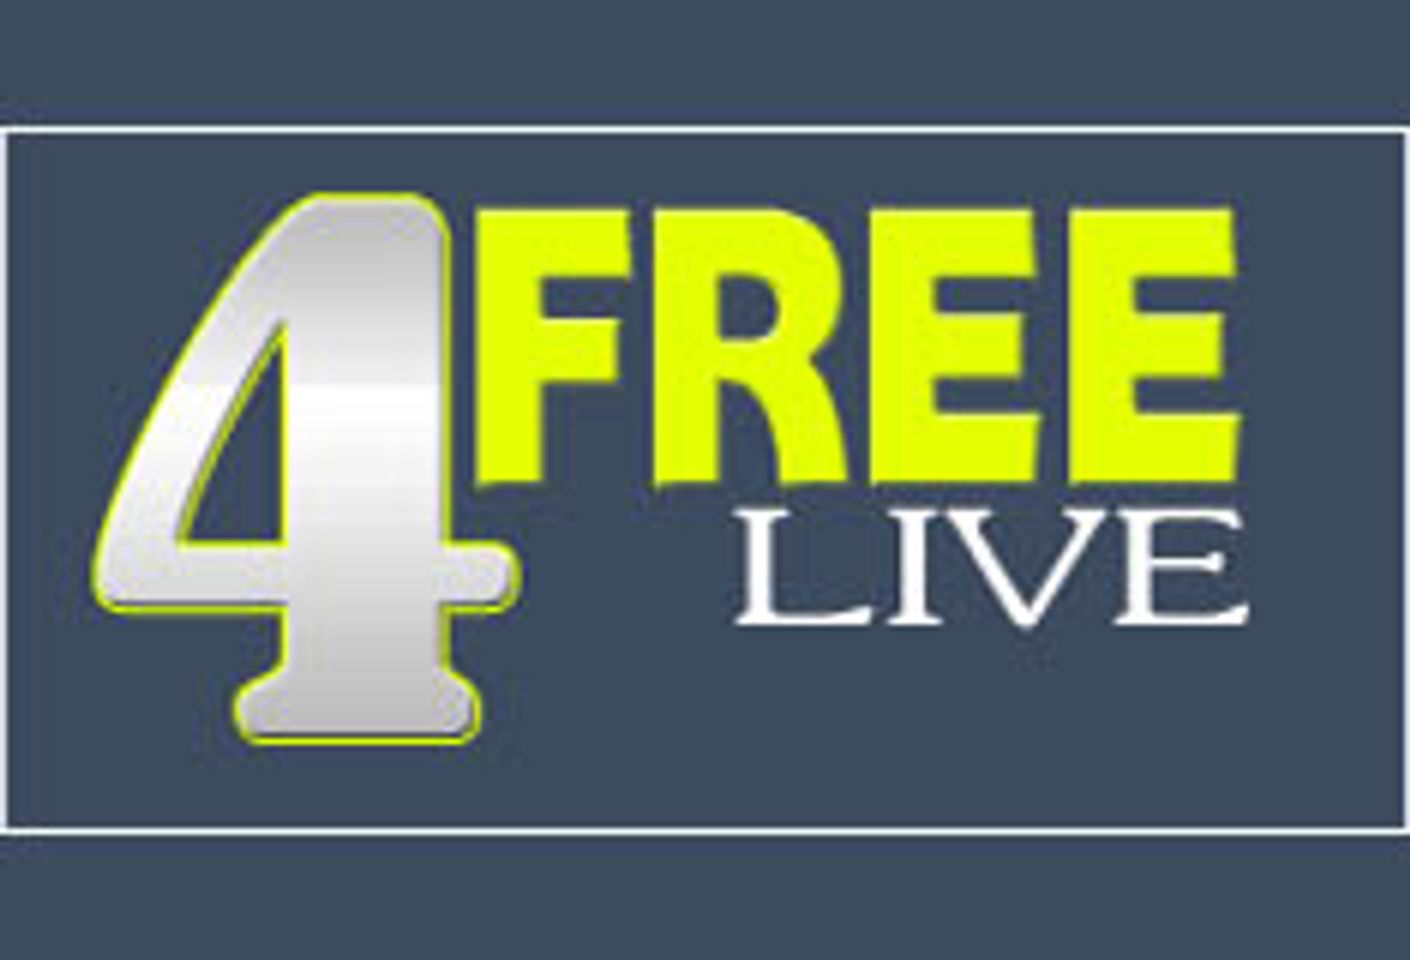 4FreeLive.com Debuts With 50 Percent Payout On Webcams